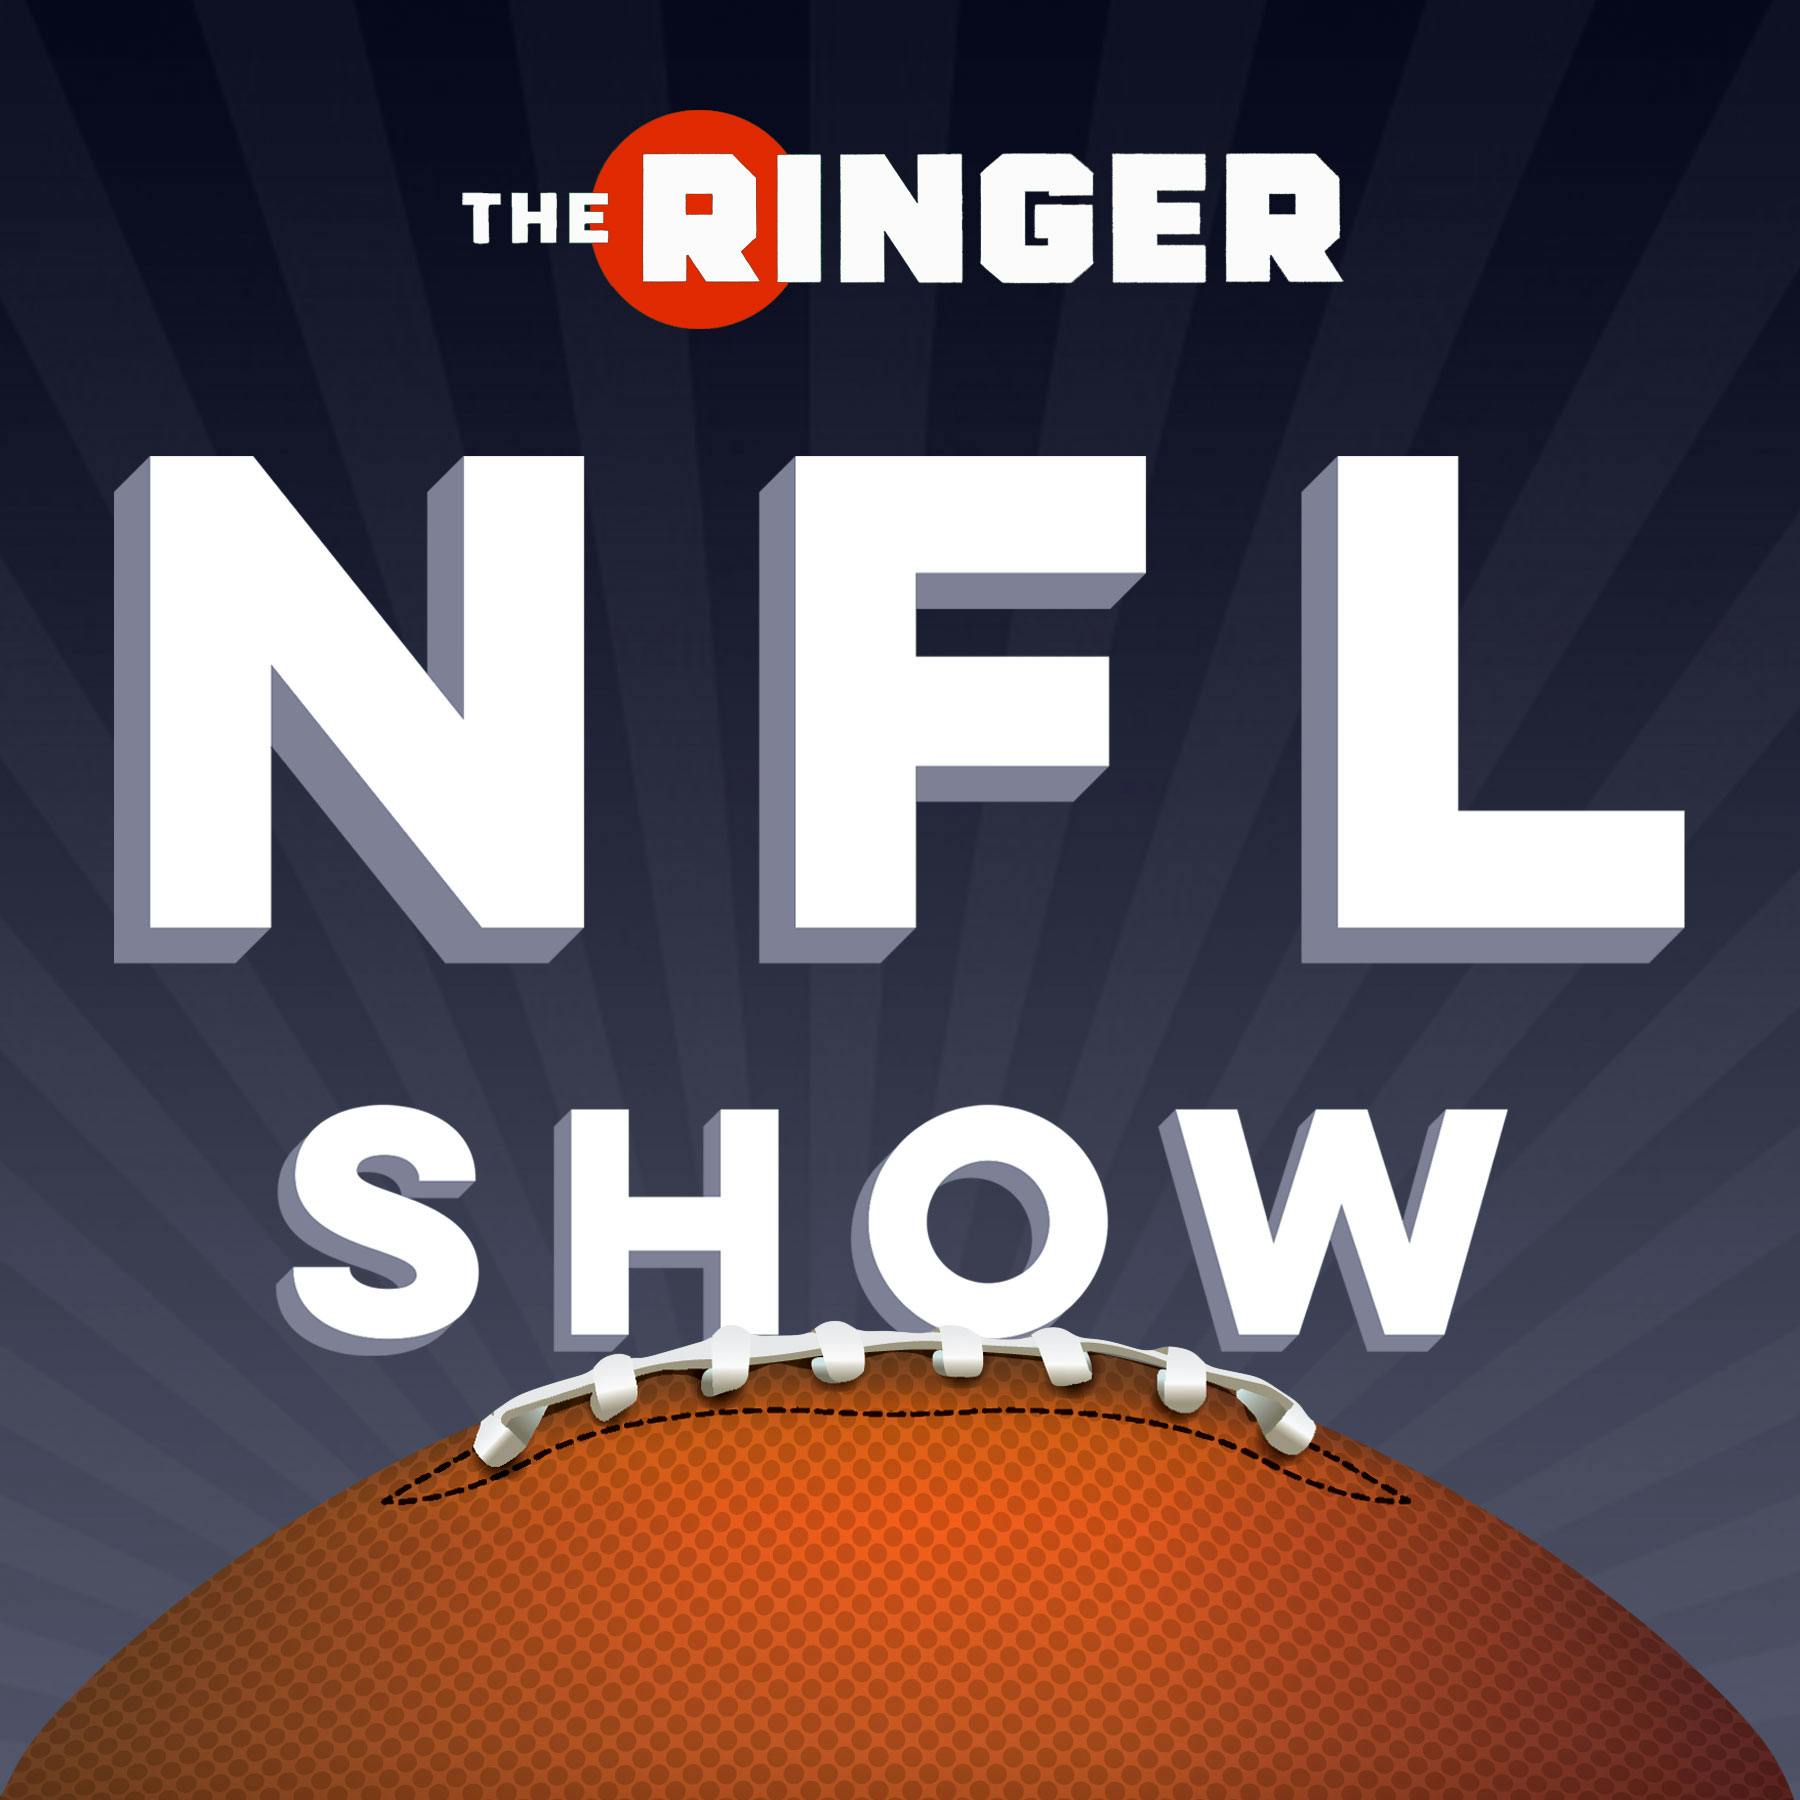 The Dallas Cowboys’ Expectations, Plus: What Will 2020 NFL Game Days Look Like? | The Ringer NFL Show